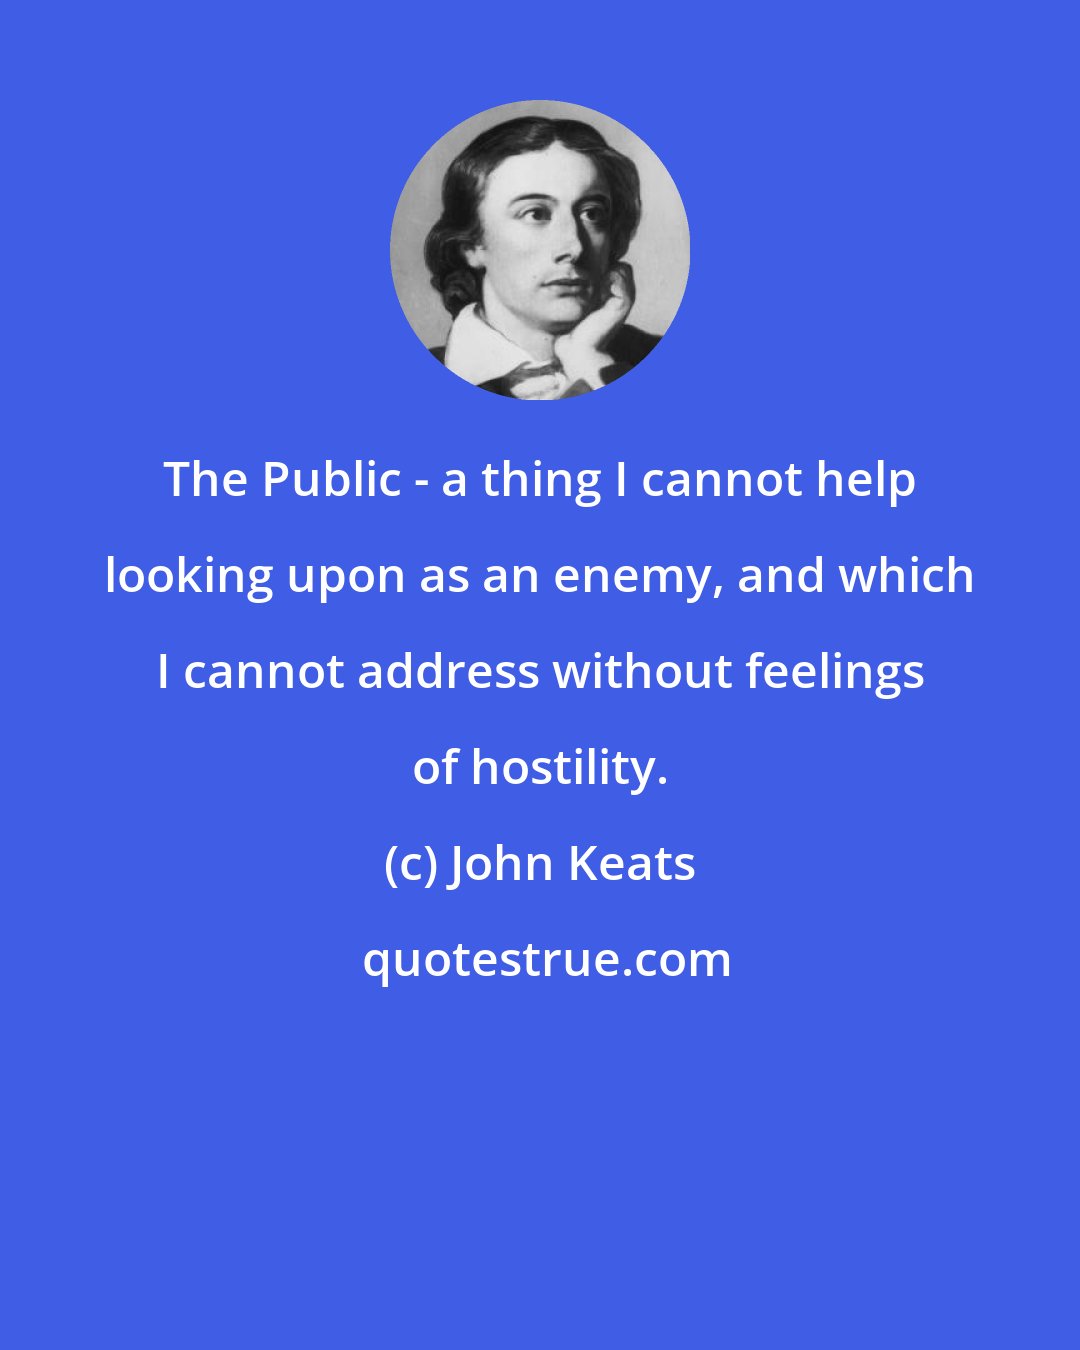 John Keats: The Public - a thing I cannot help looking upon as an enemy, and which I cannot address without feelings of hostility.